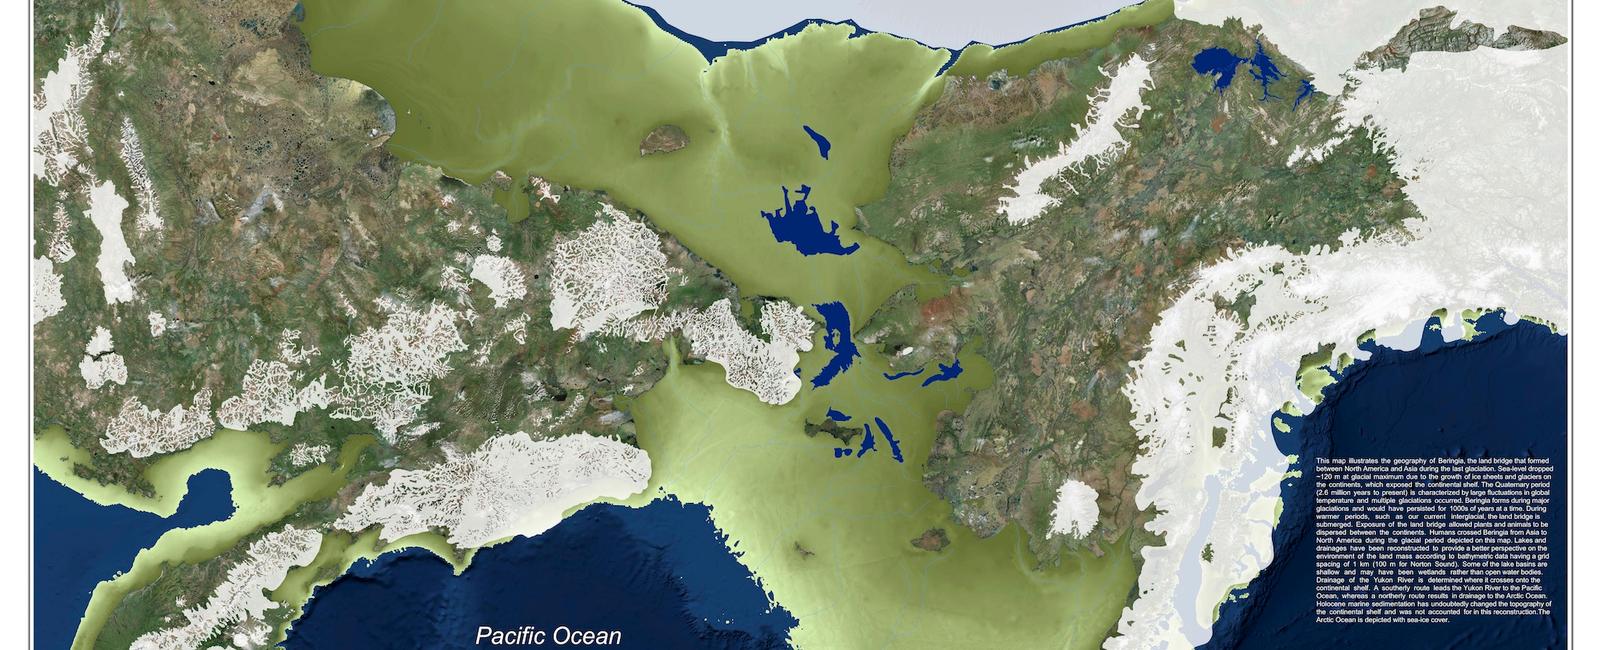 The bering strait is theorized to be a former land bridge between asia and north america during the ice age as the strait is shallow averaging only 50 meters in depth this would have allowed plants and animals to move between continents